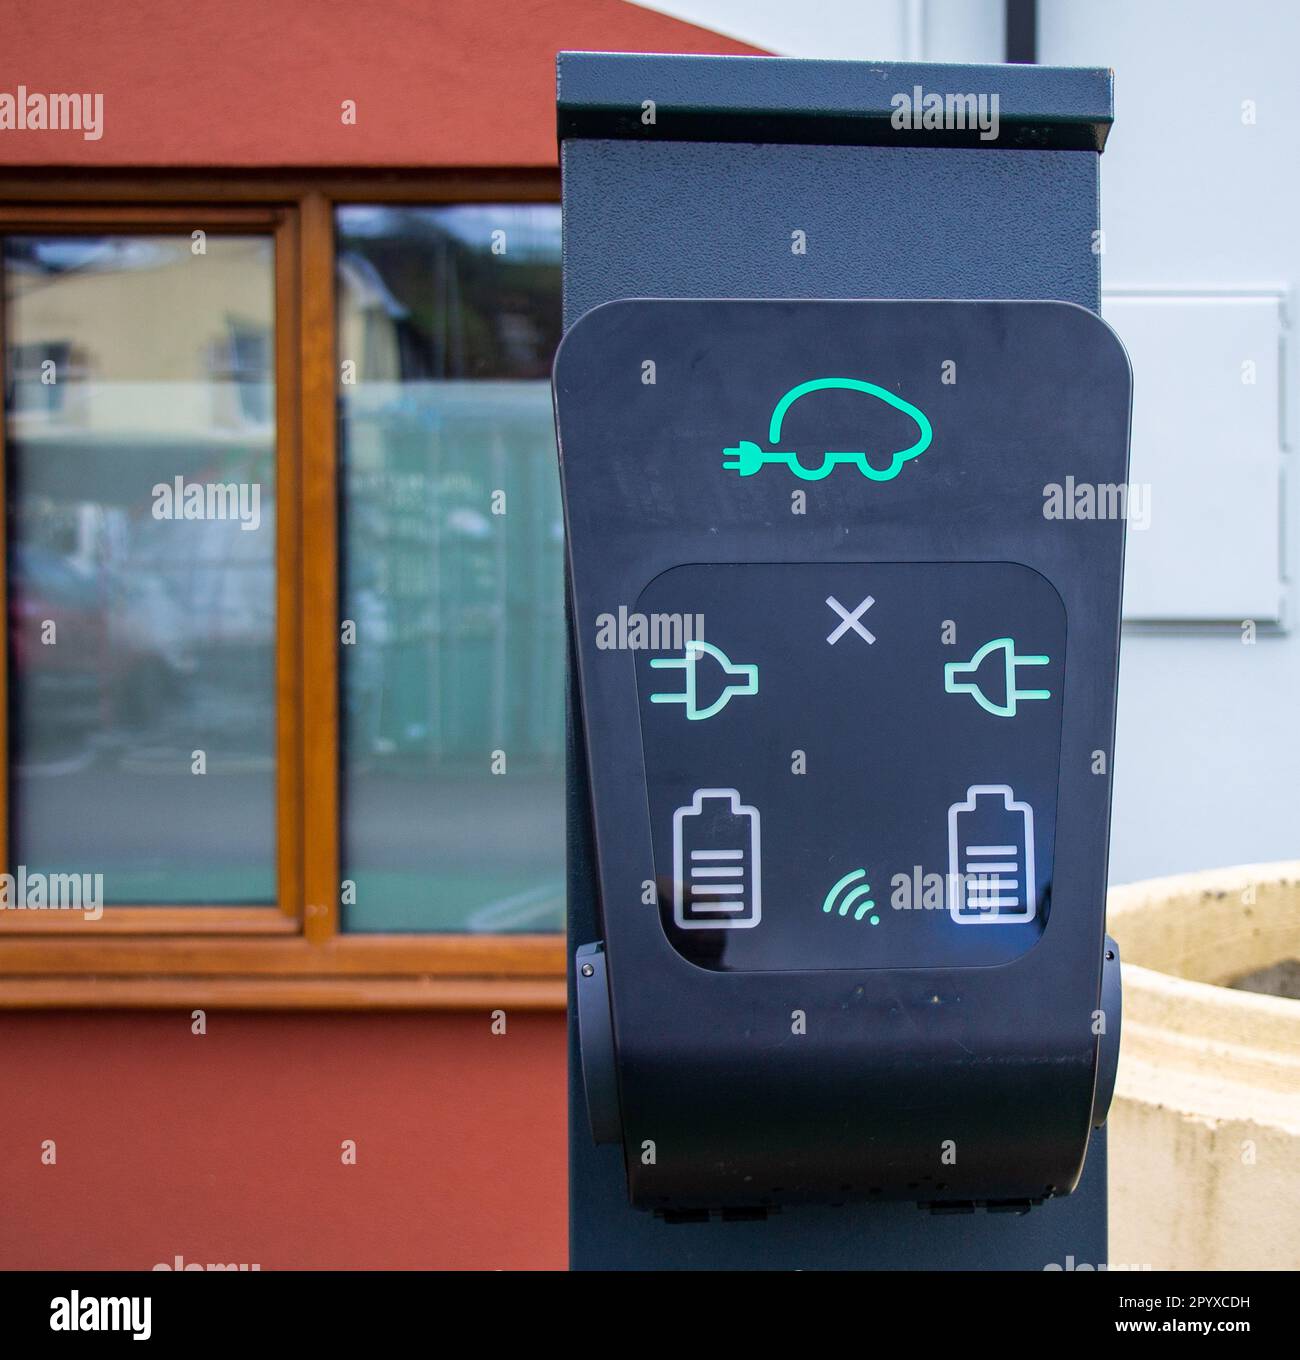 Electric Vehicle Charging Point or Station Stock Photo